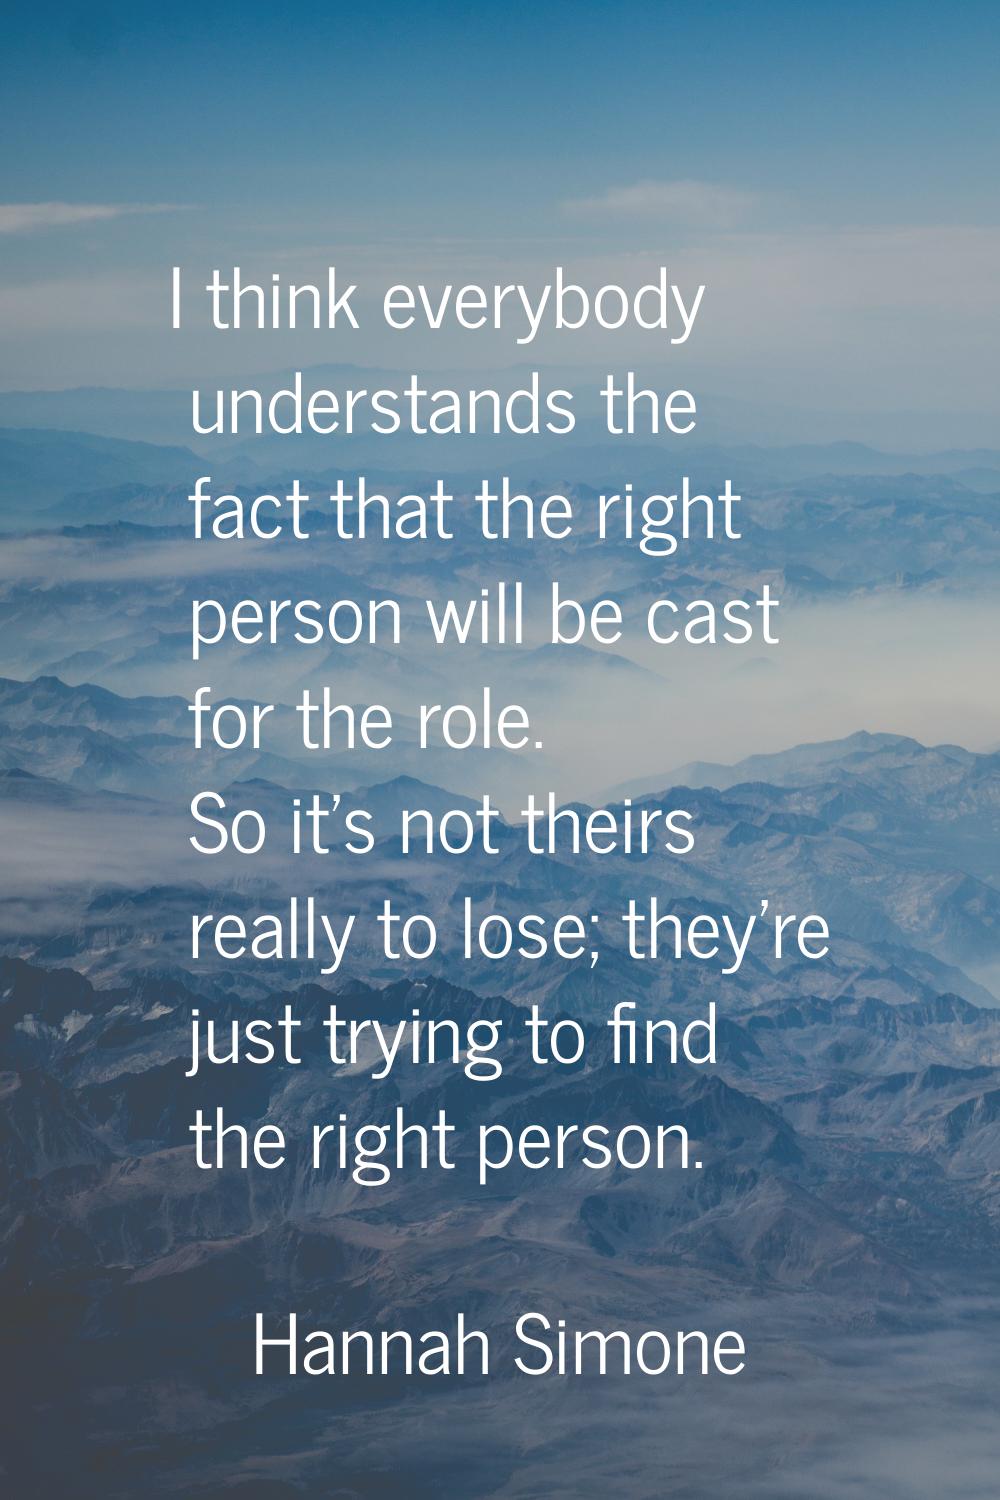 I think everybody understands the fact that the right person will be cast for the role. So it's not